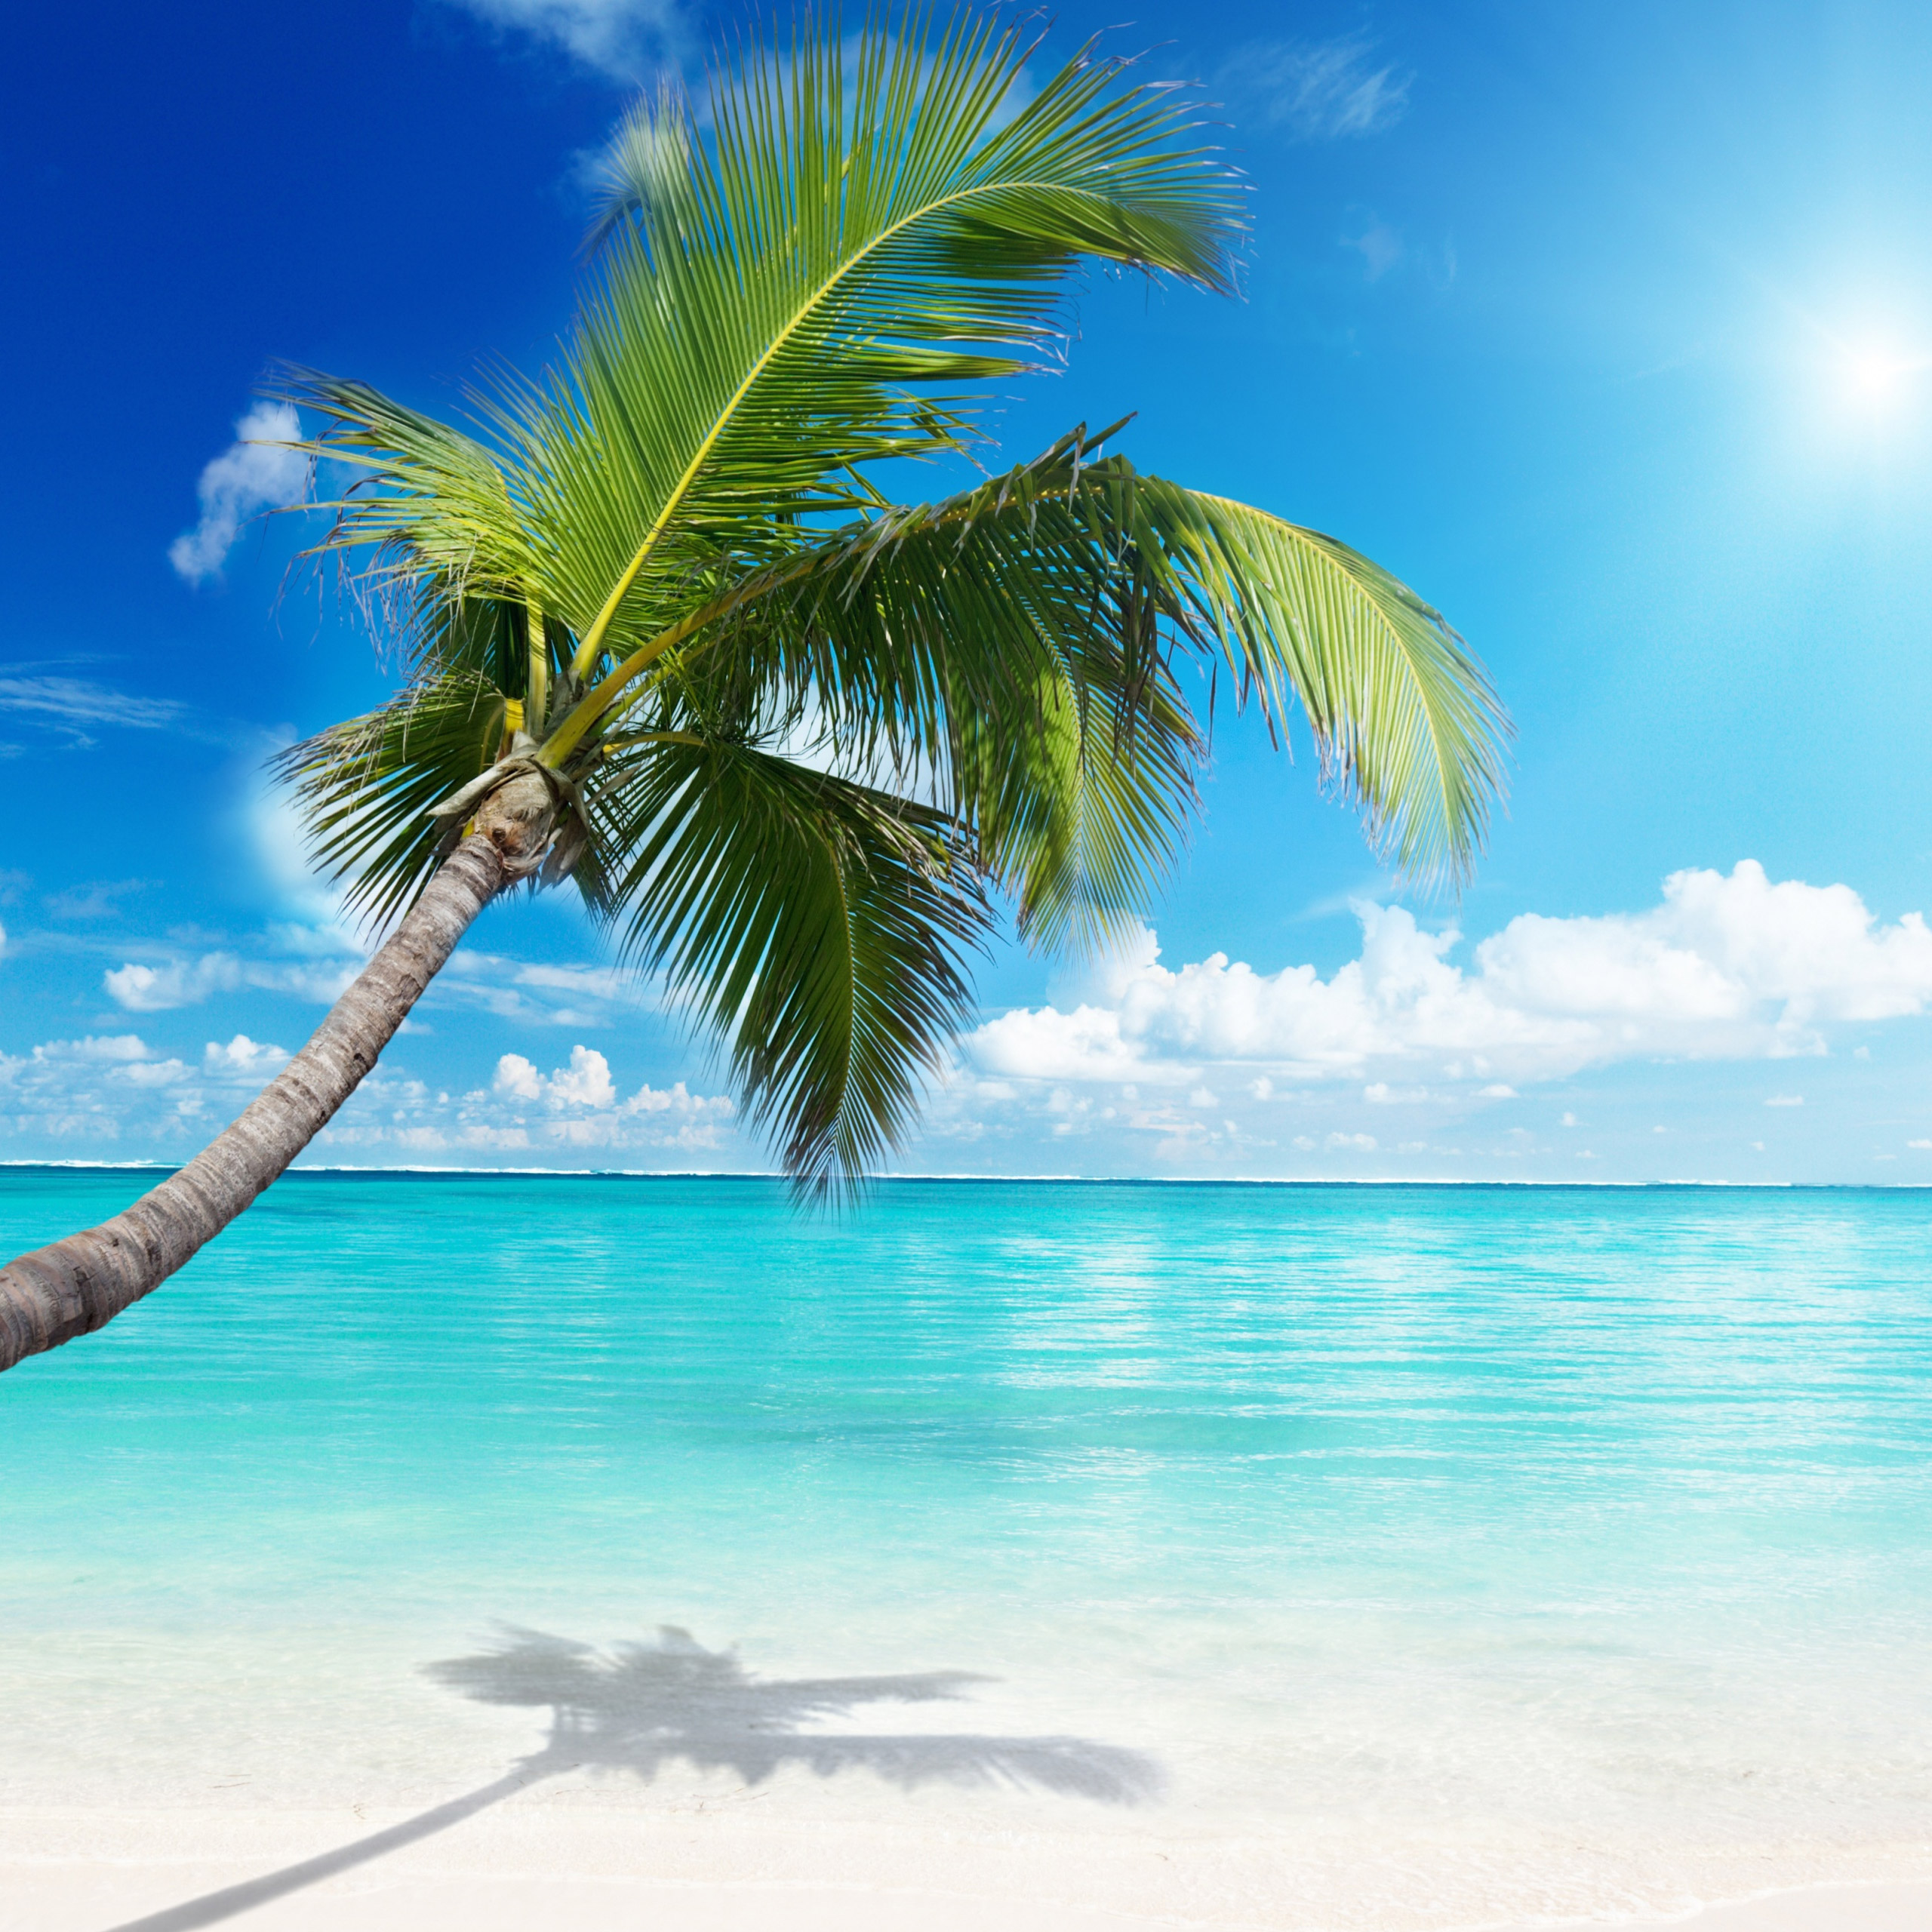 The Beach Amazing Nature Wallpaper Photos - Cool HD ...